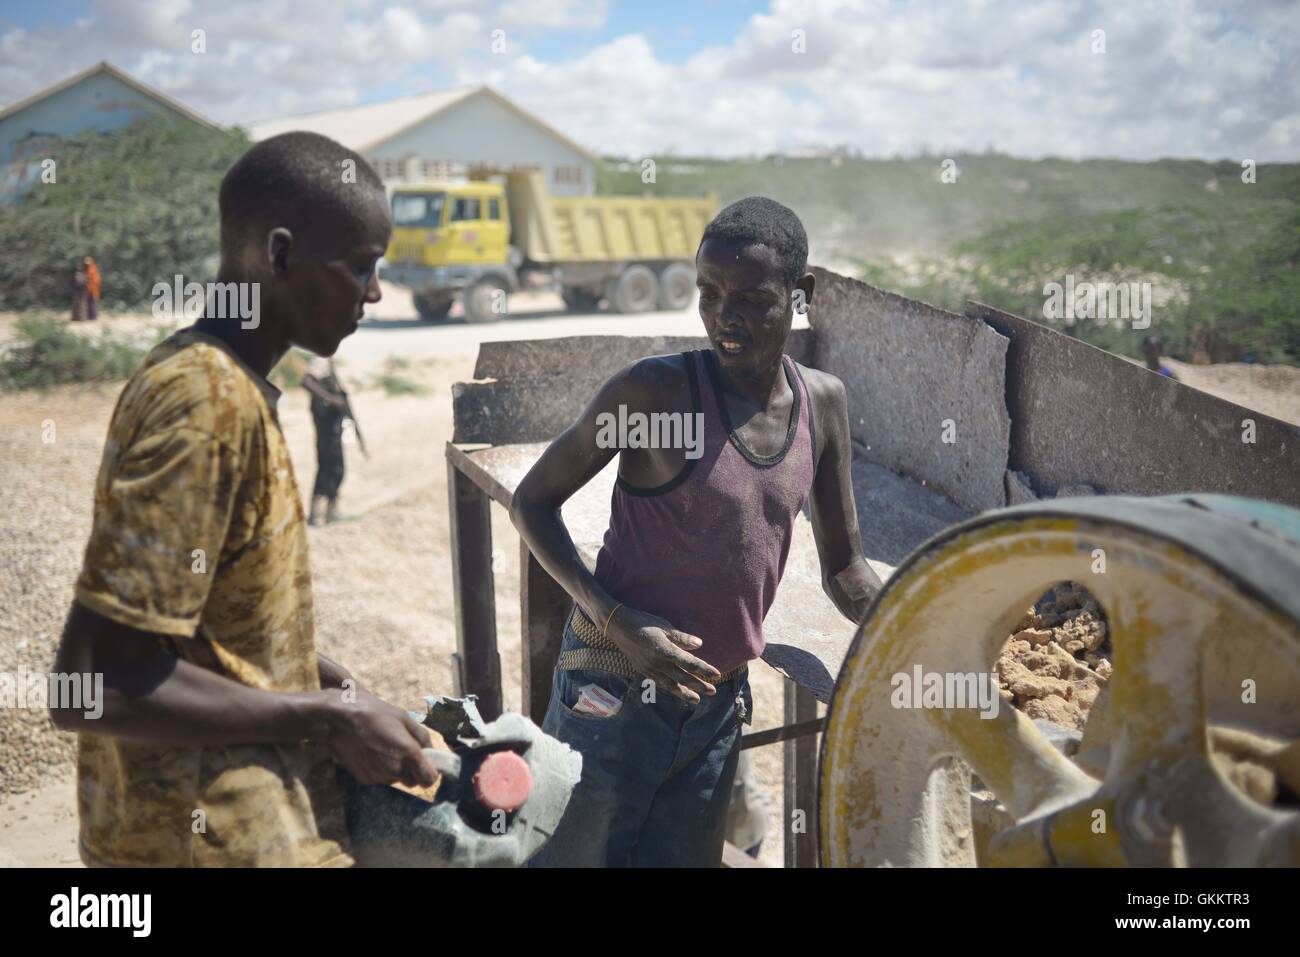 Workers place rocks in a grinder in order to create gravel at a quarry in Mogadishu, Somalia, on April 10. AMISOM Photo / Tobin Jones Stock Photo